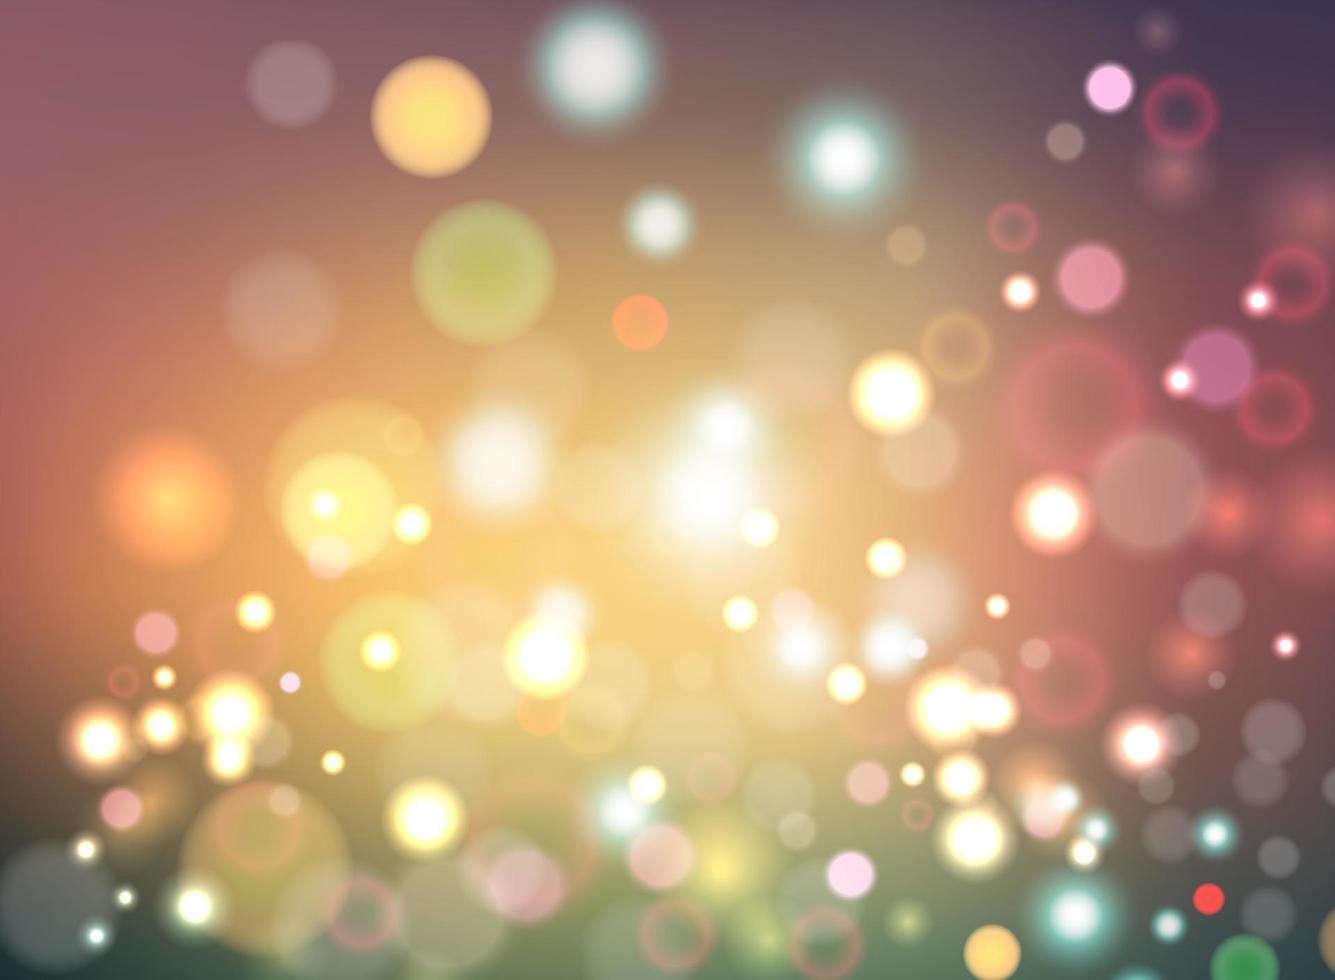 Abstract colorful smooth blurred vector background with bokeh effect. Light dots   energy background, wallpaper